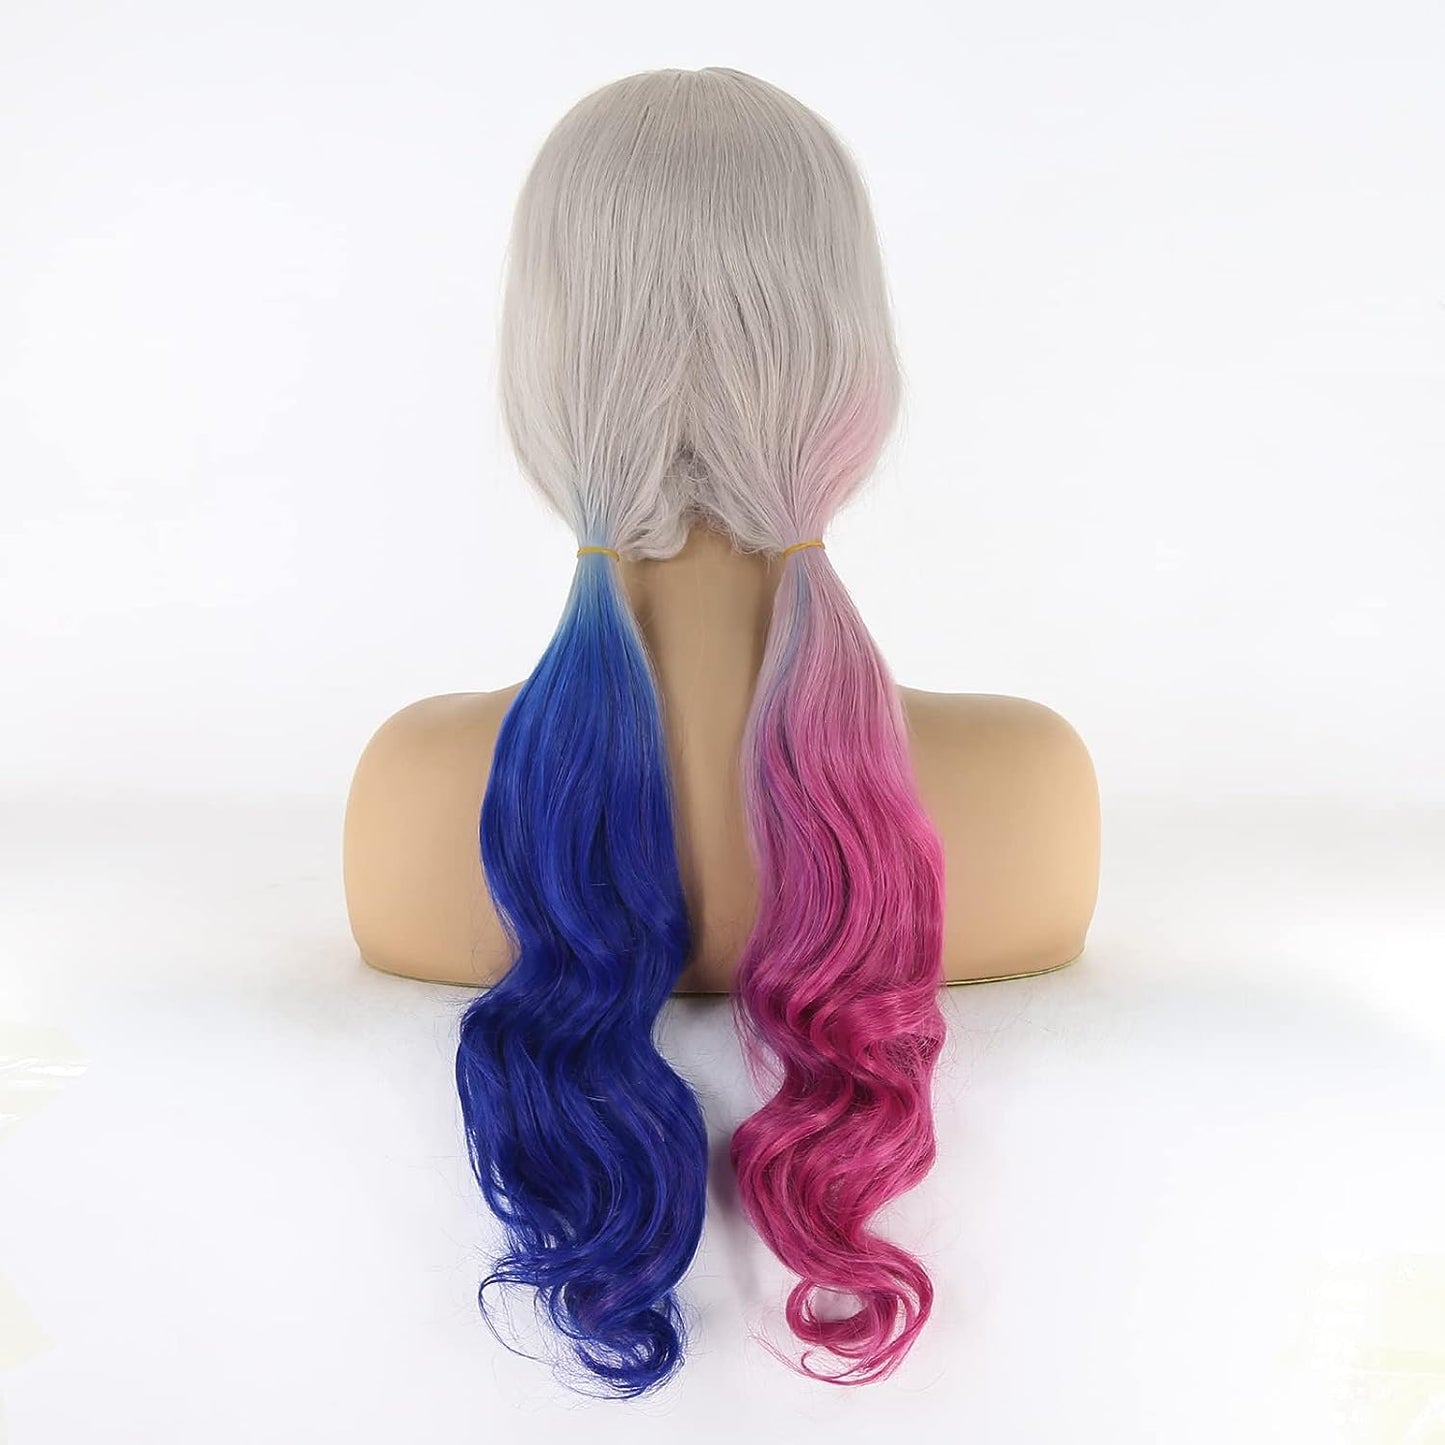 Get Playfully Chaotic with our Harley Quinn Lace Front Wig - Perfect for Cosplay and Fun!